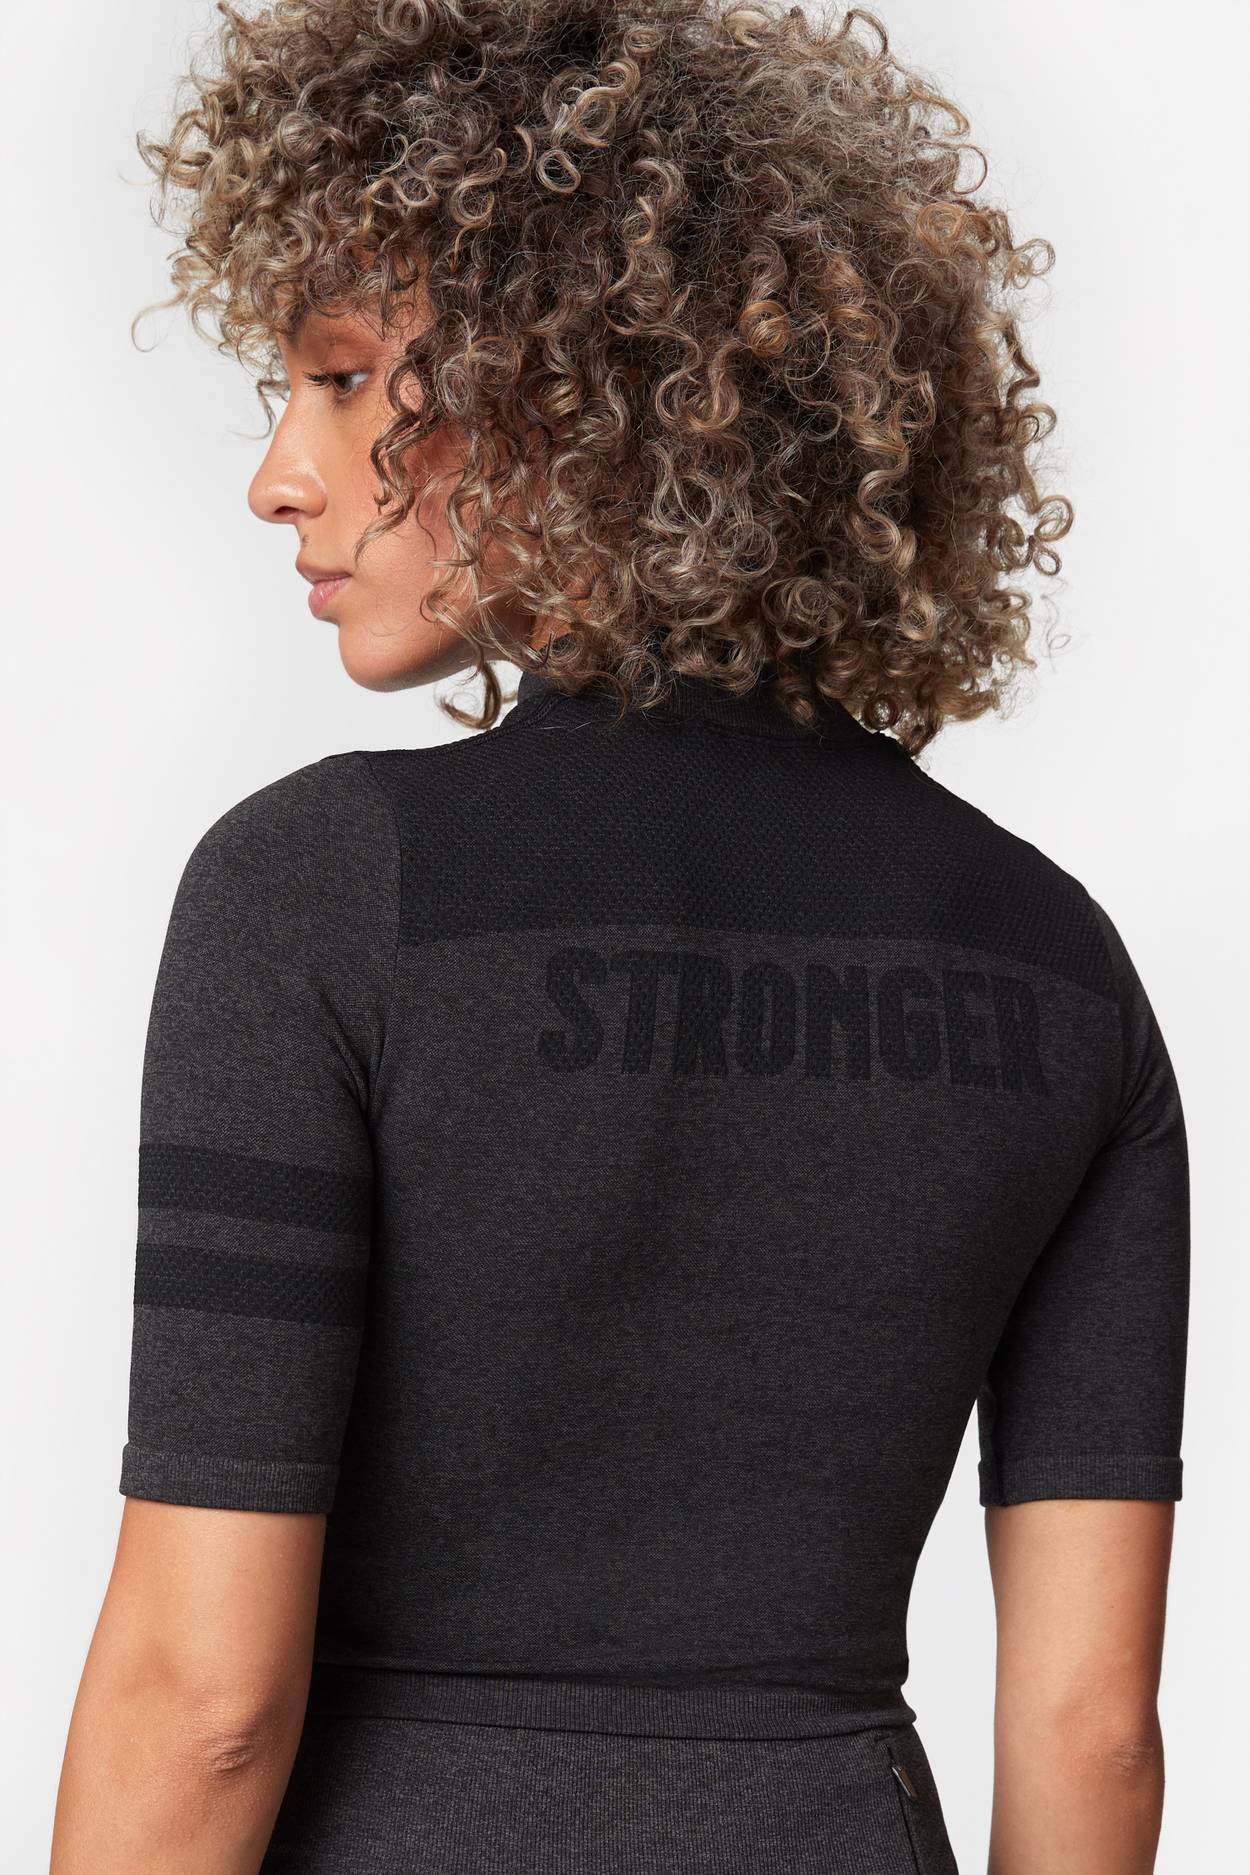 Seamless Charge Buy I | STRONGER Online Tee